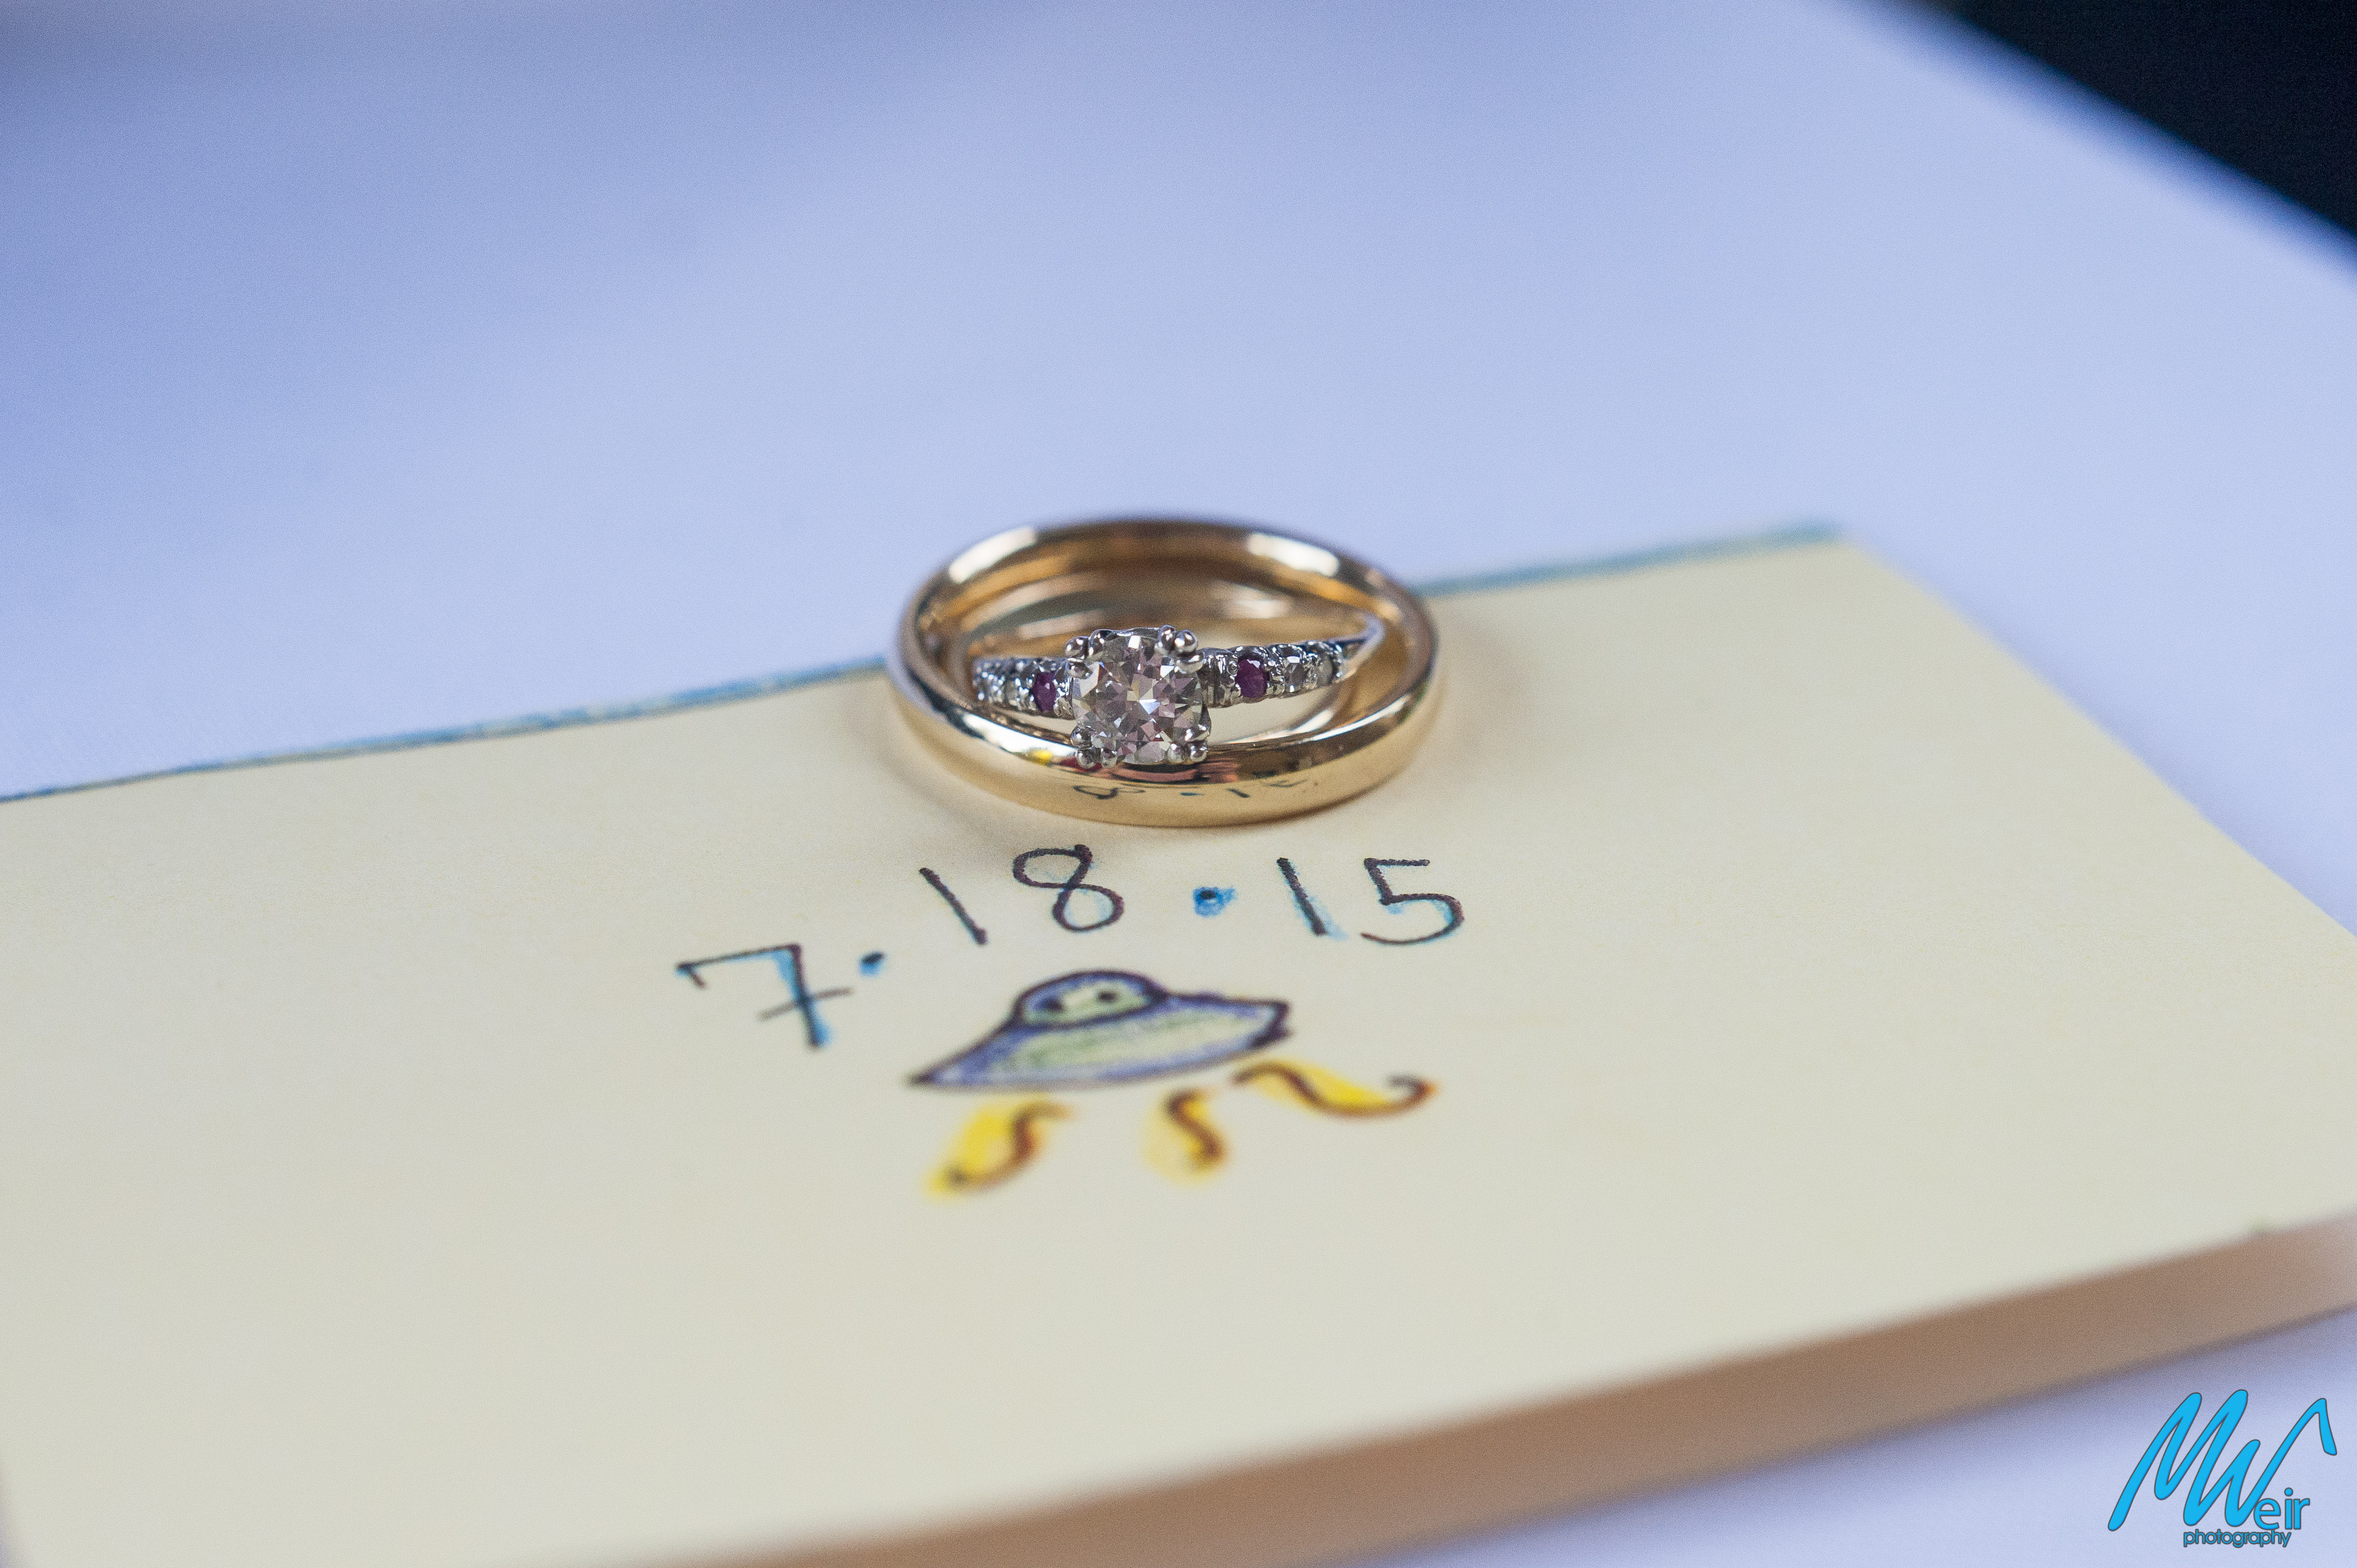 detail photo of bride and grooms rings